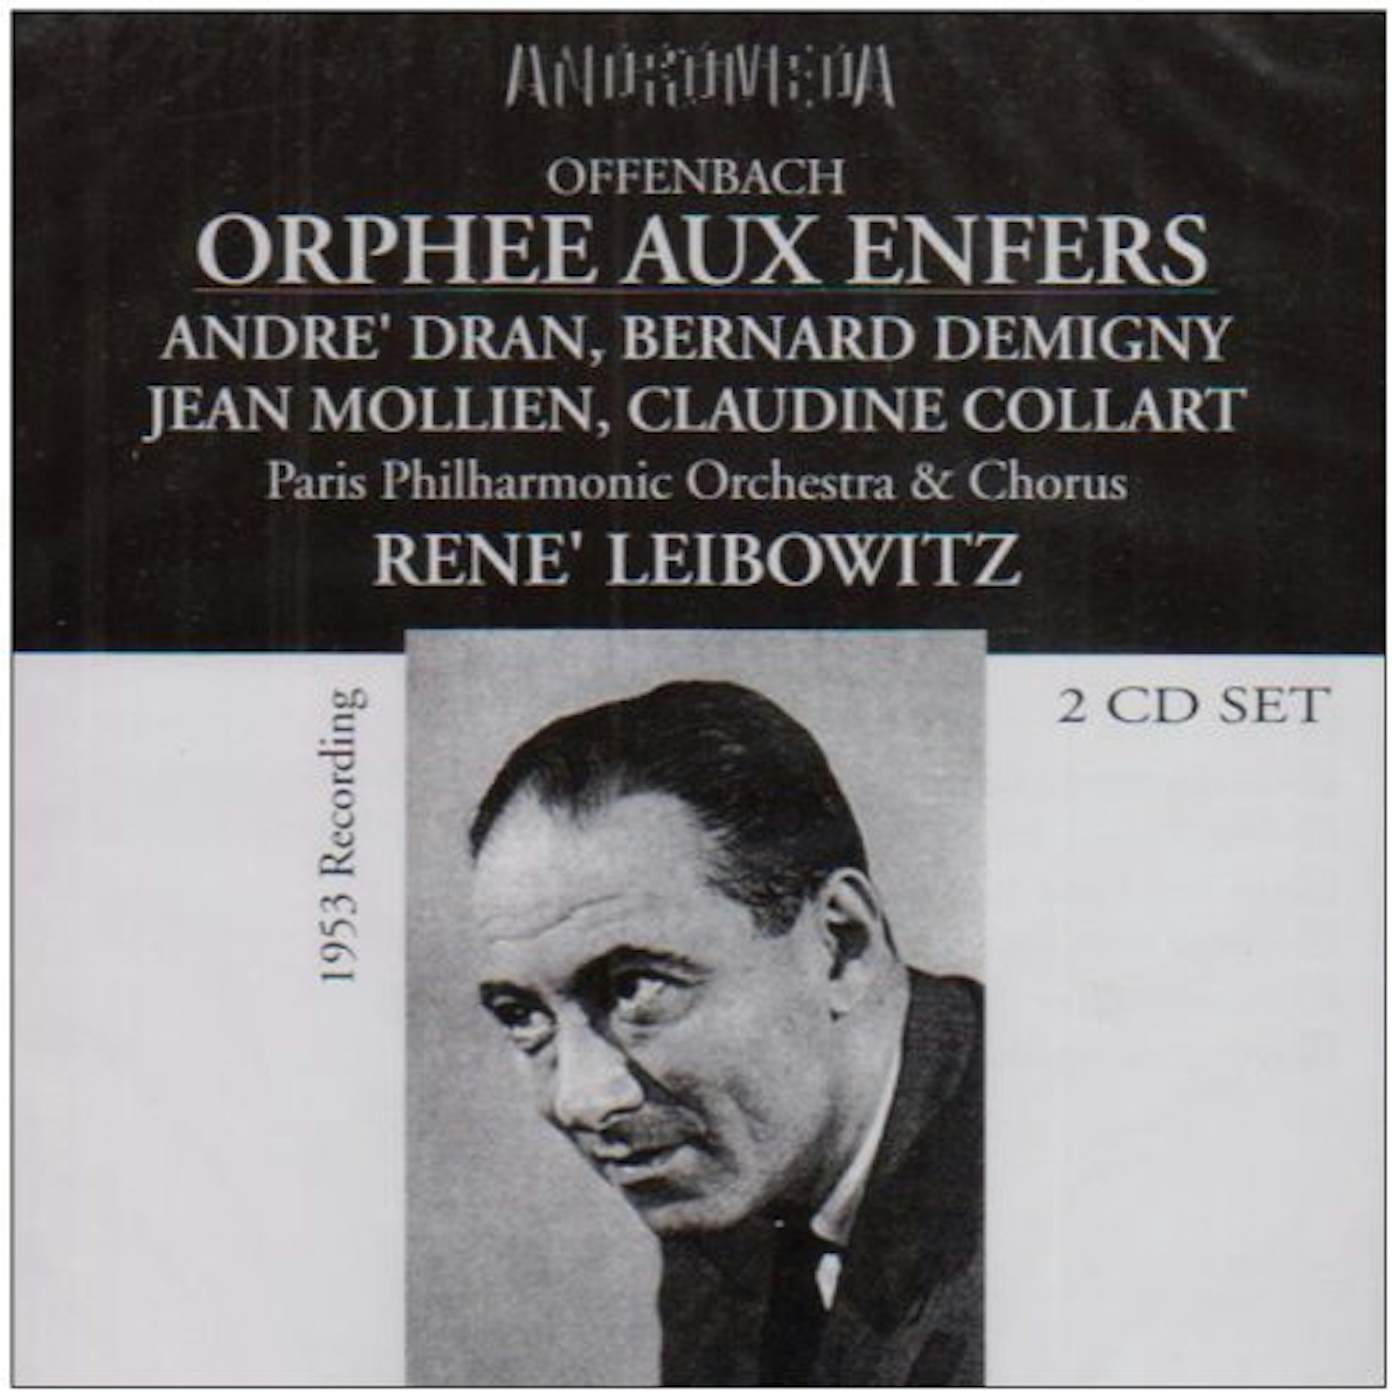 Offenbach ORPHEE AUX ENFERS CD